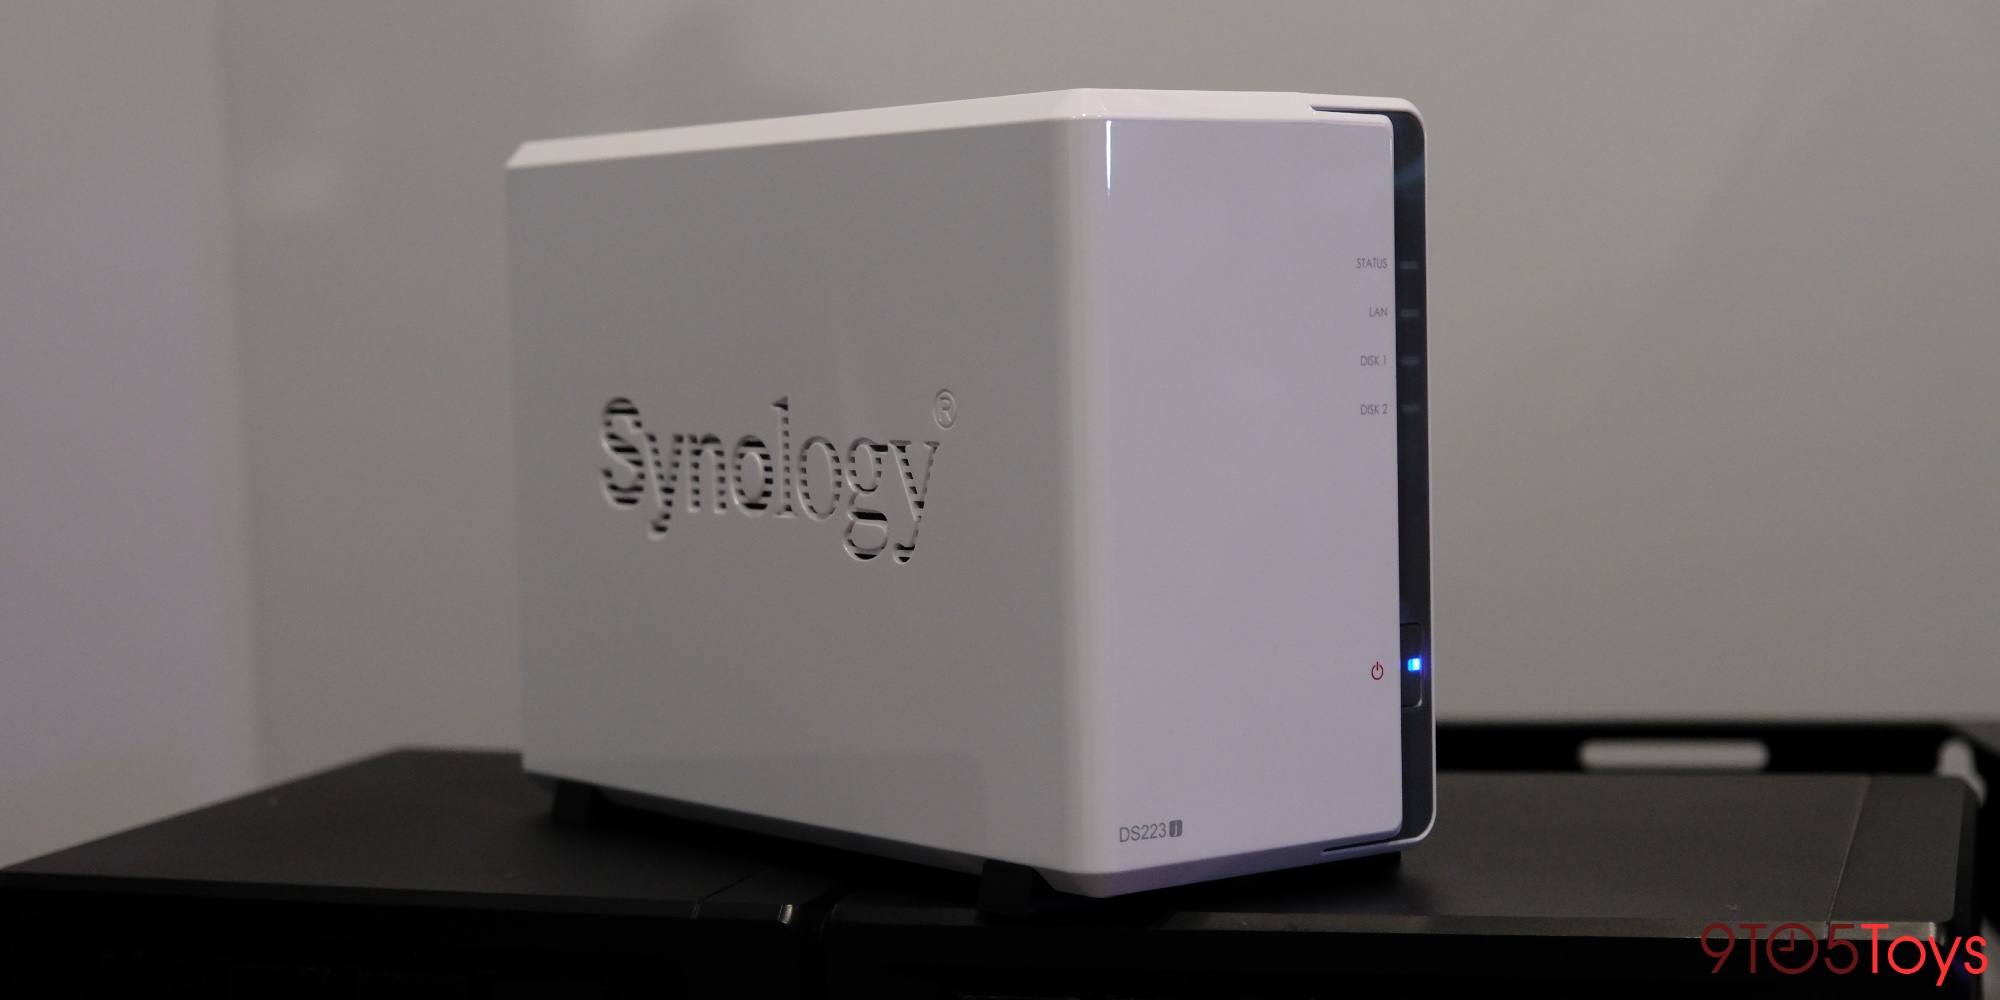 Synology's new DS223j 2-bay NAS sees first discount to $155 (Reg. $190)